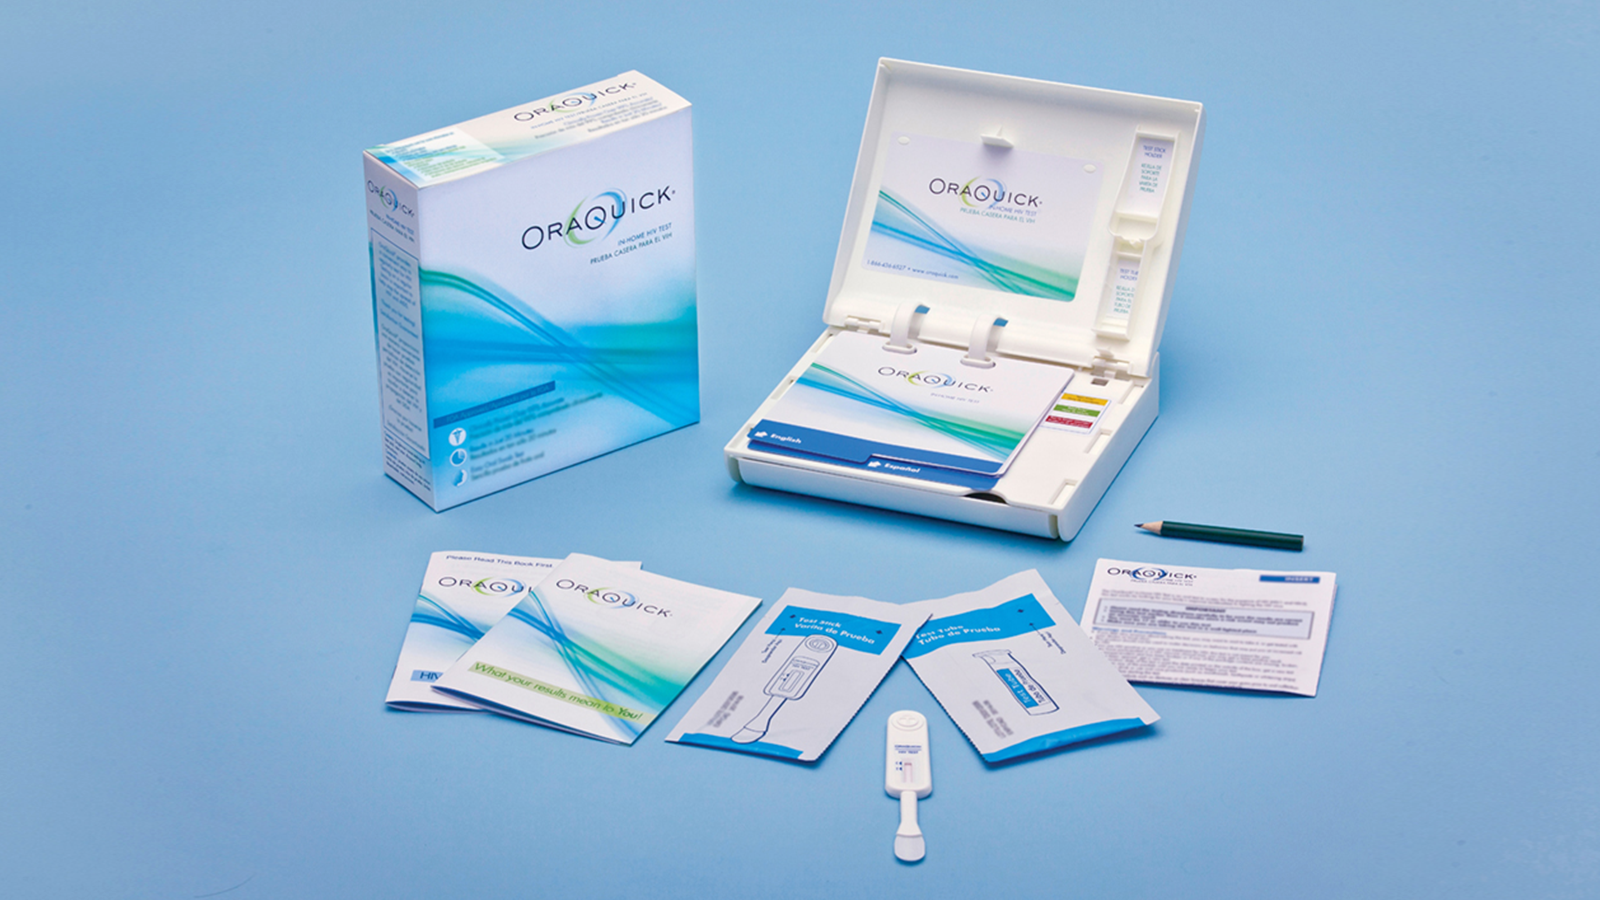 The OraQuick HIV at Home testing Kit.